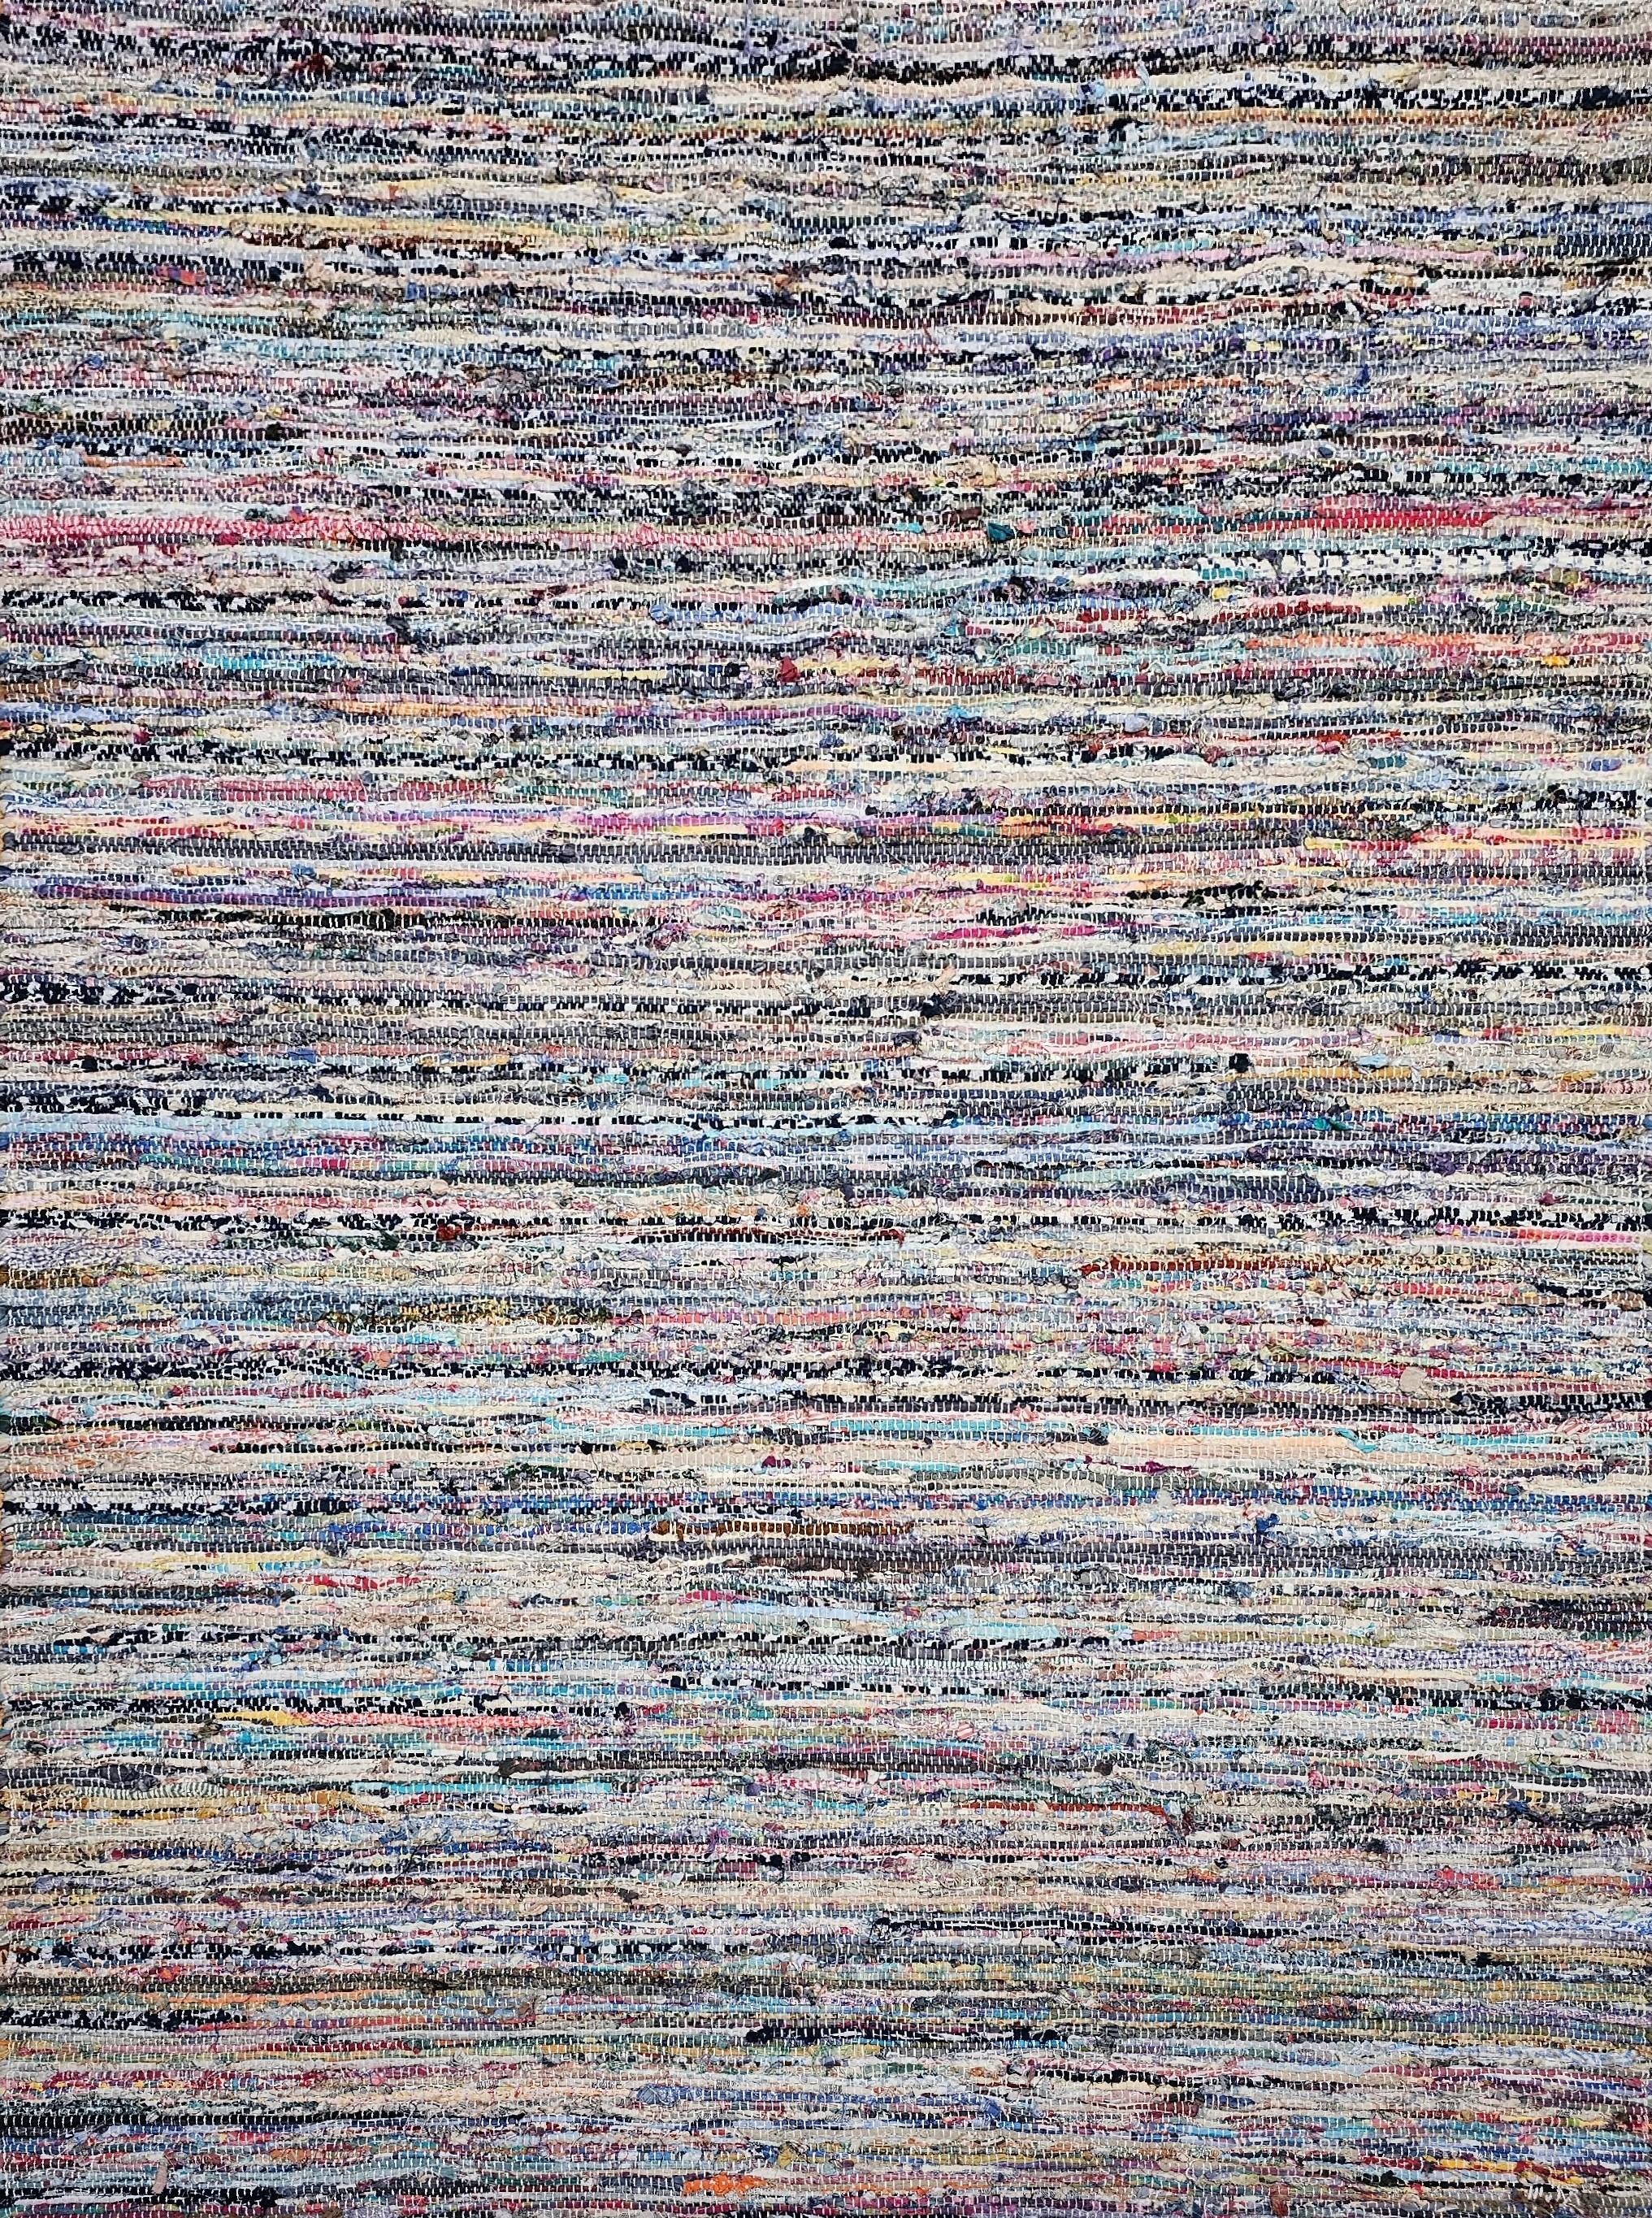 Hand-Woven Vintage American Rag Rug in Stripe Pattern in Blue, Yellow, Red, Pink, White